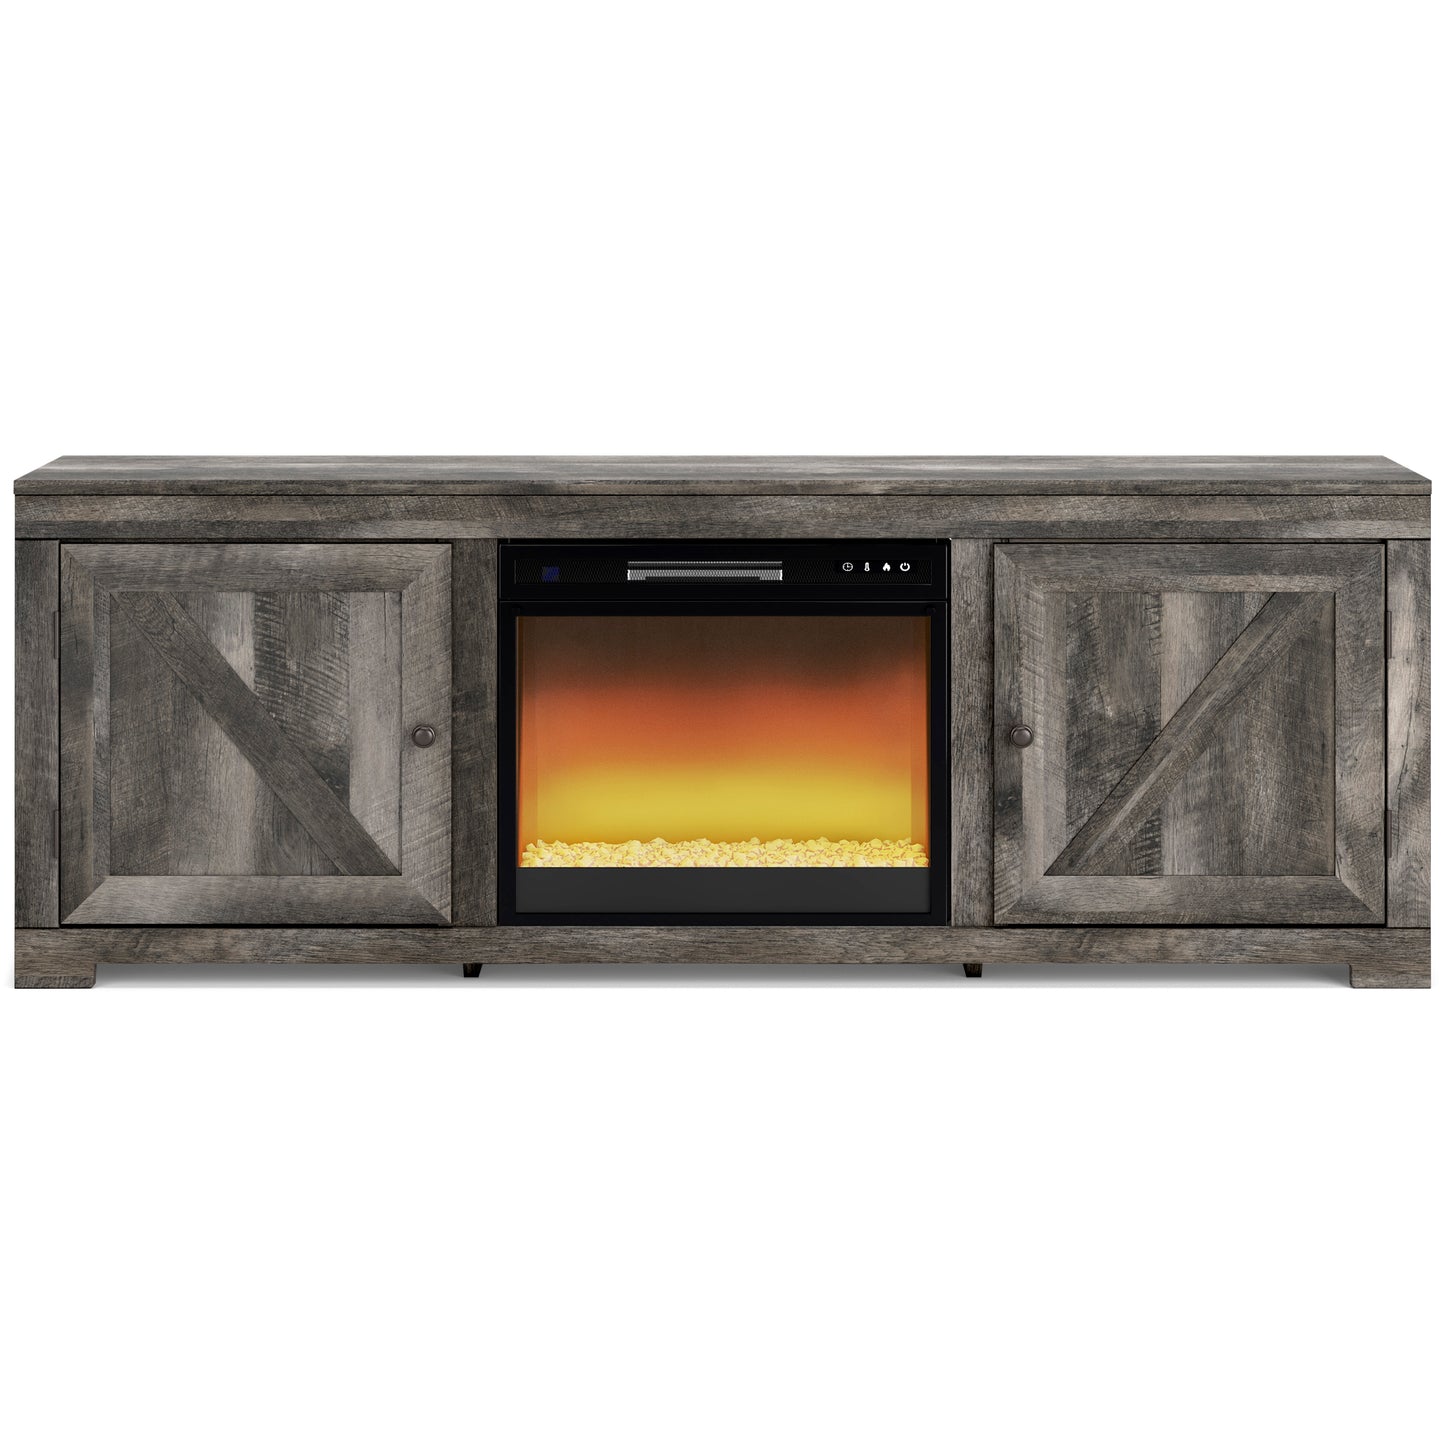 Wynnlow TV Stand with Electric Fireplace